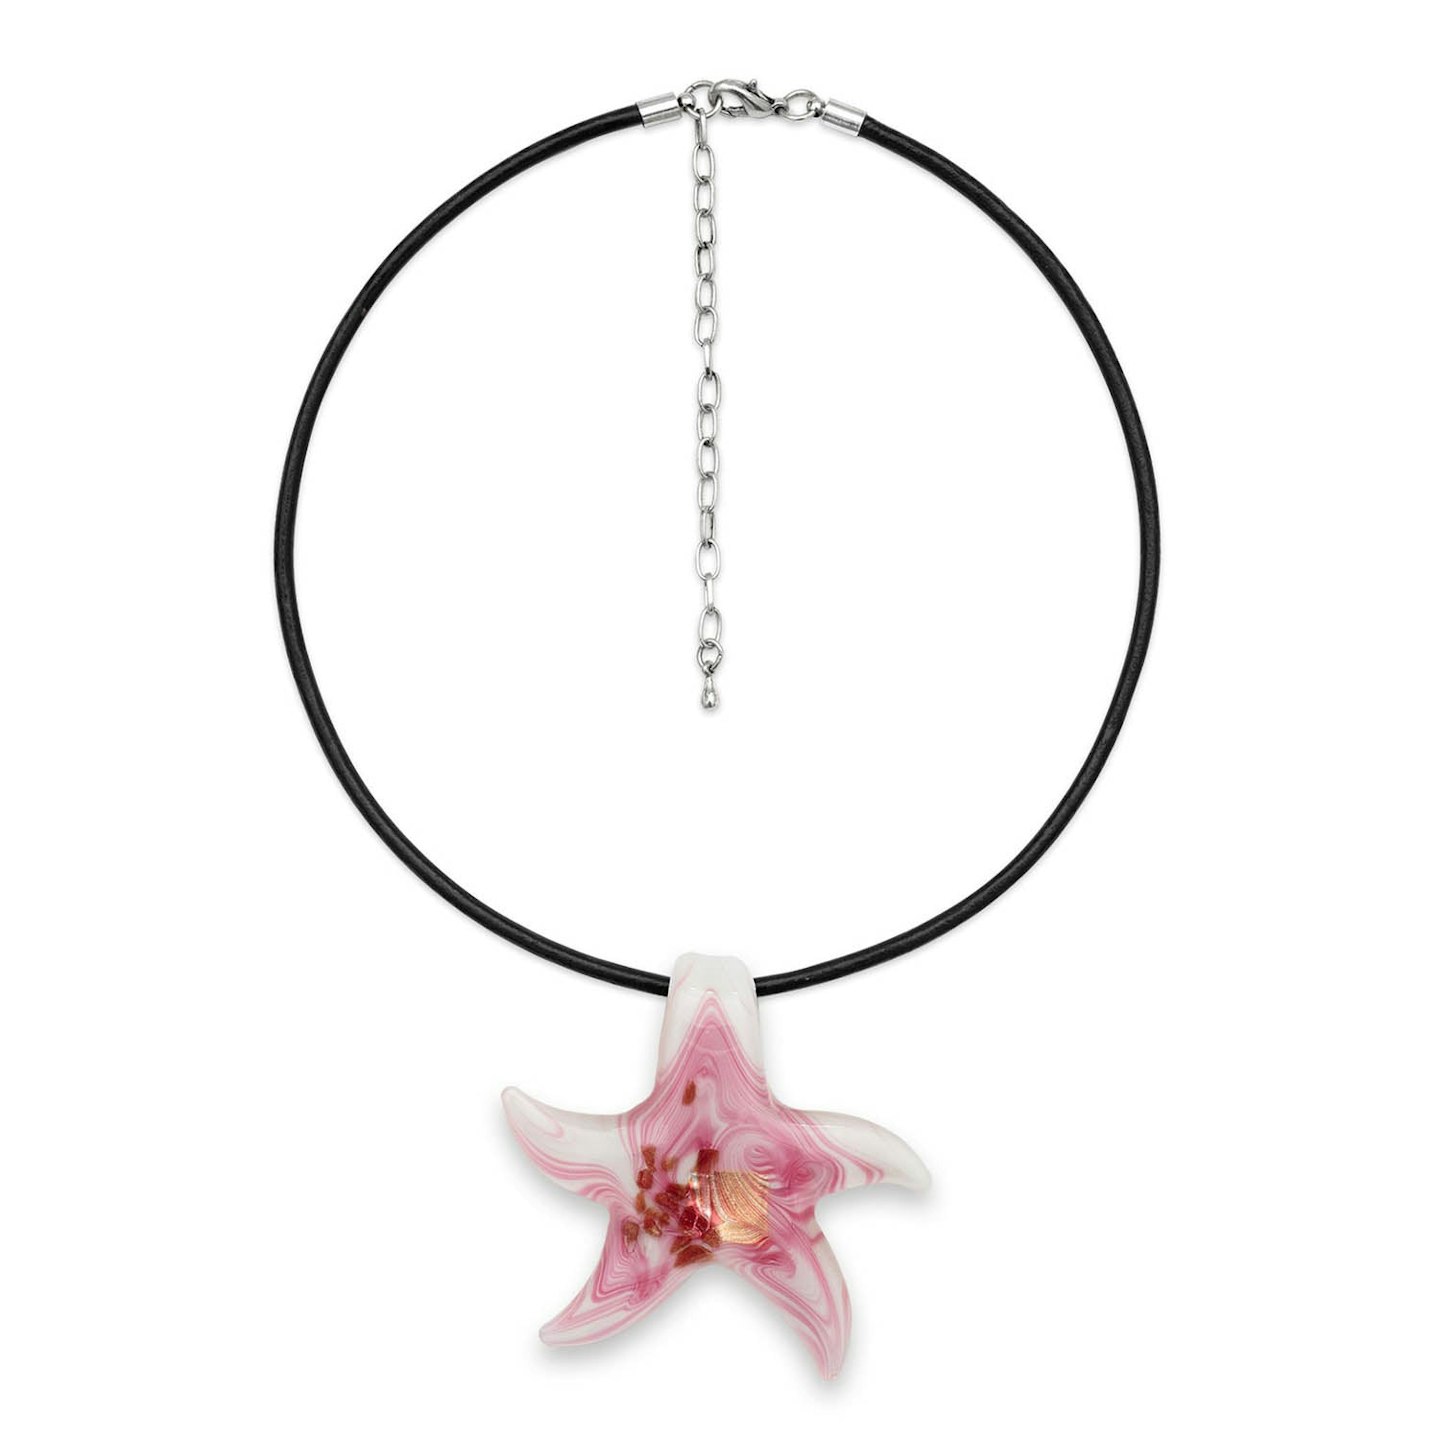 The Good Statement pendant necklace